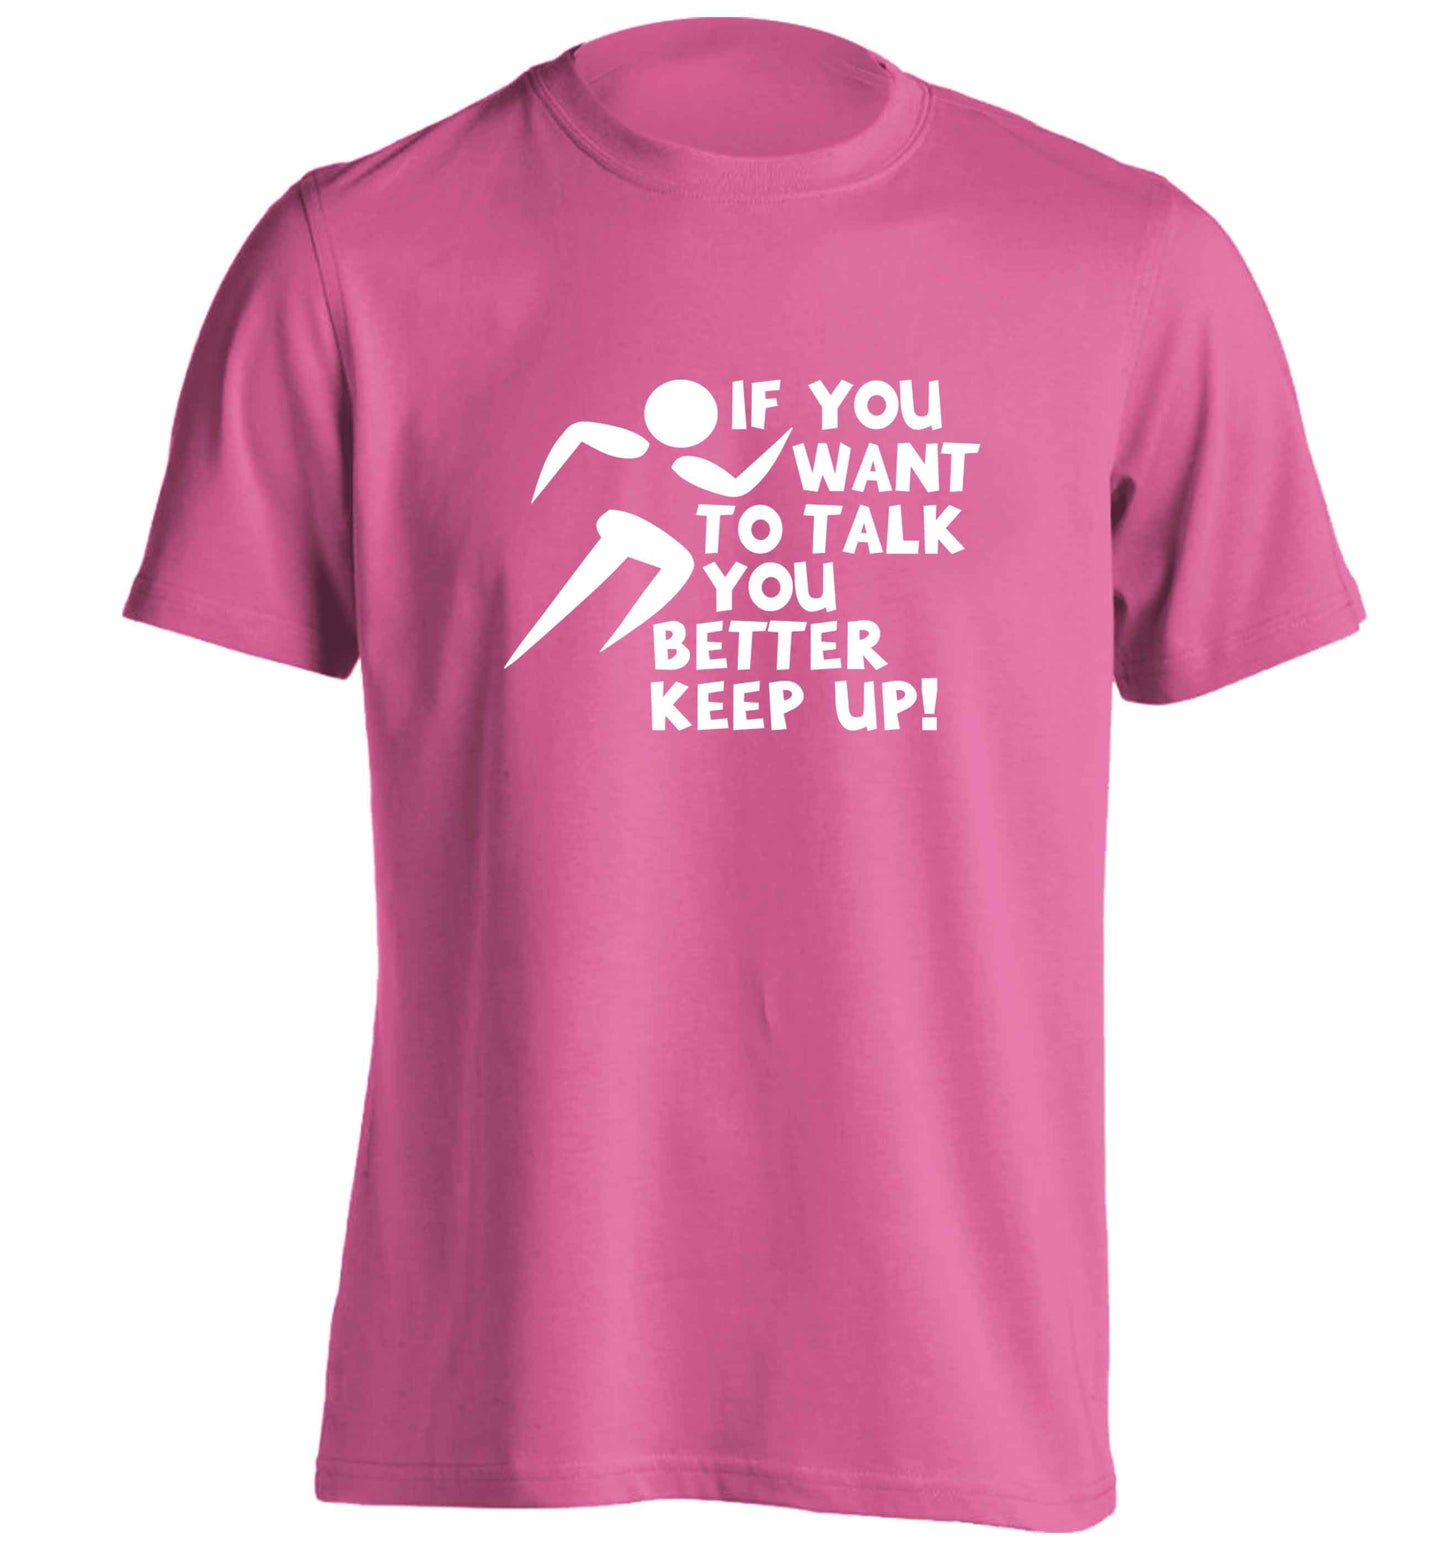 If you want to talk you better keep up! adults unisex pink Tshirt 2XL